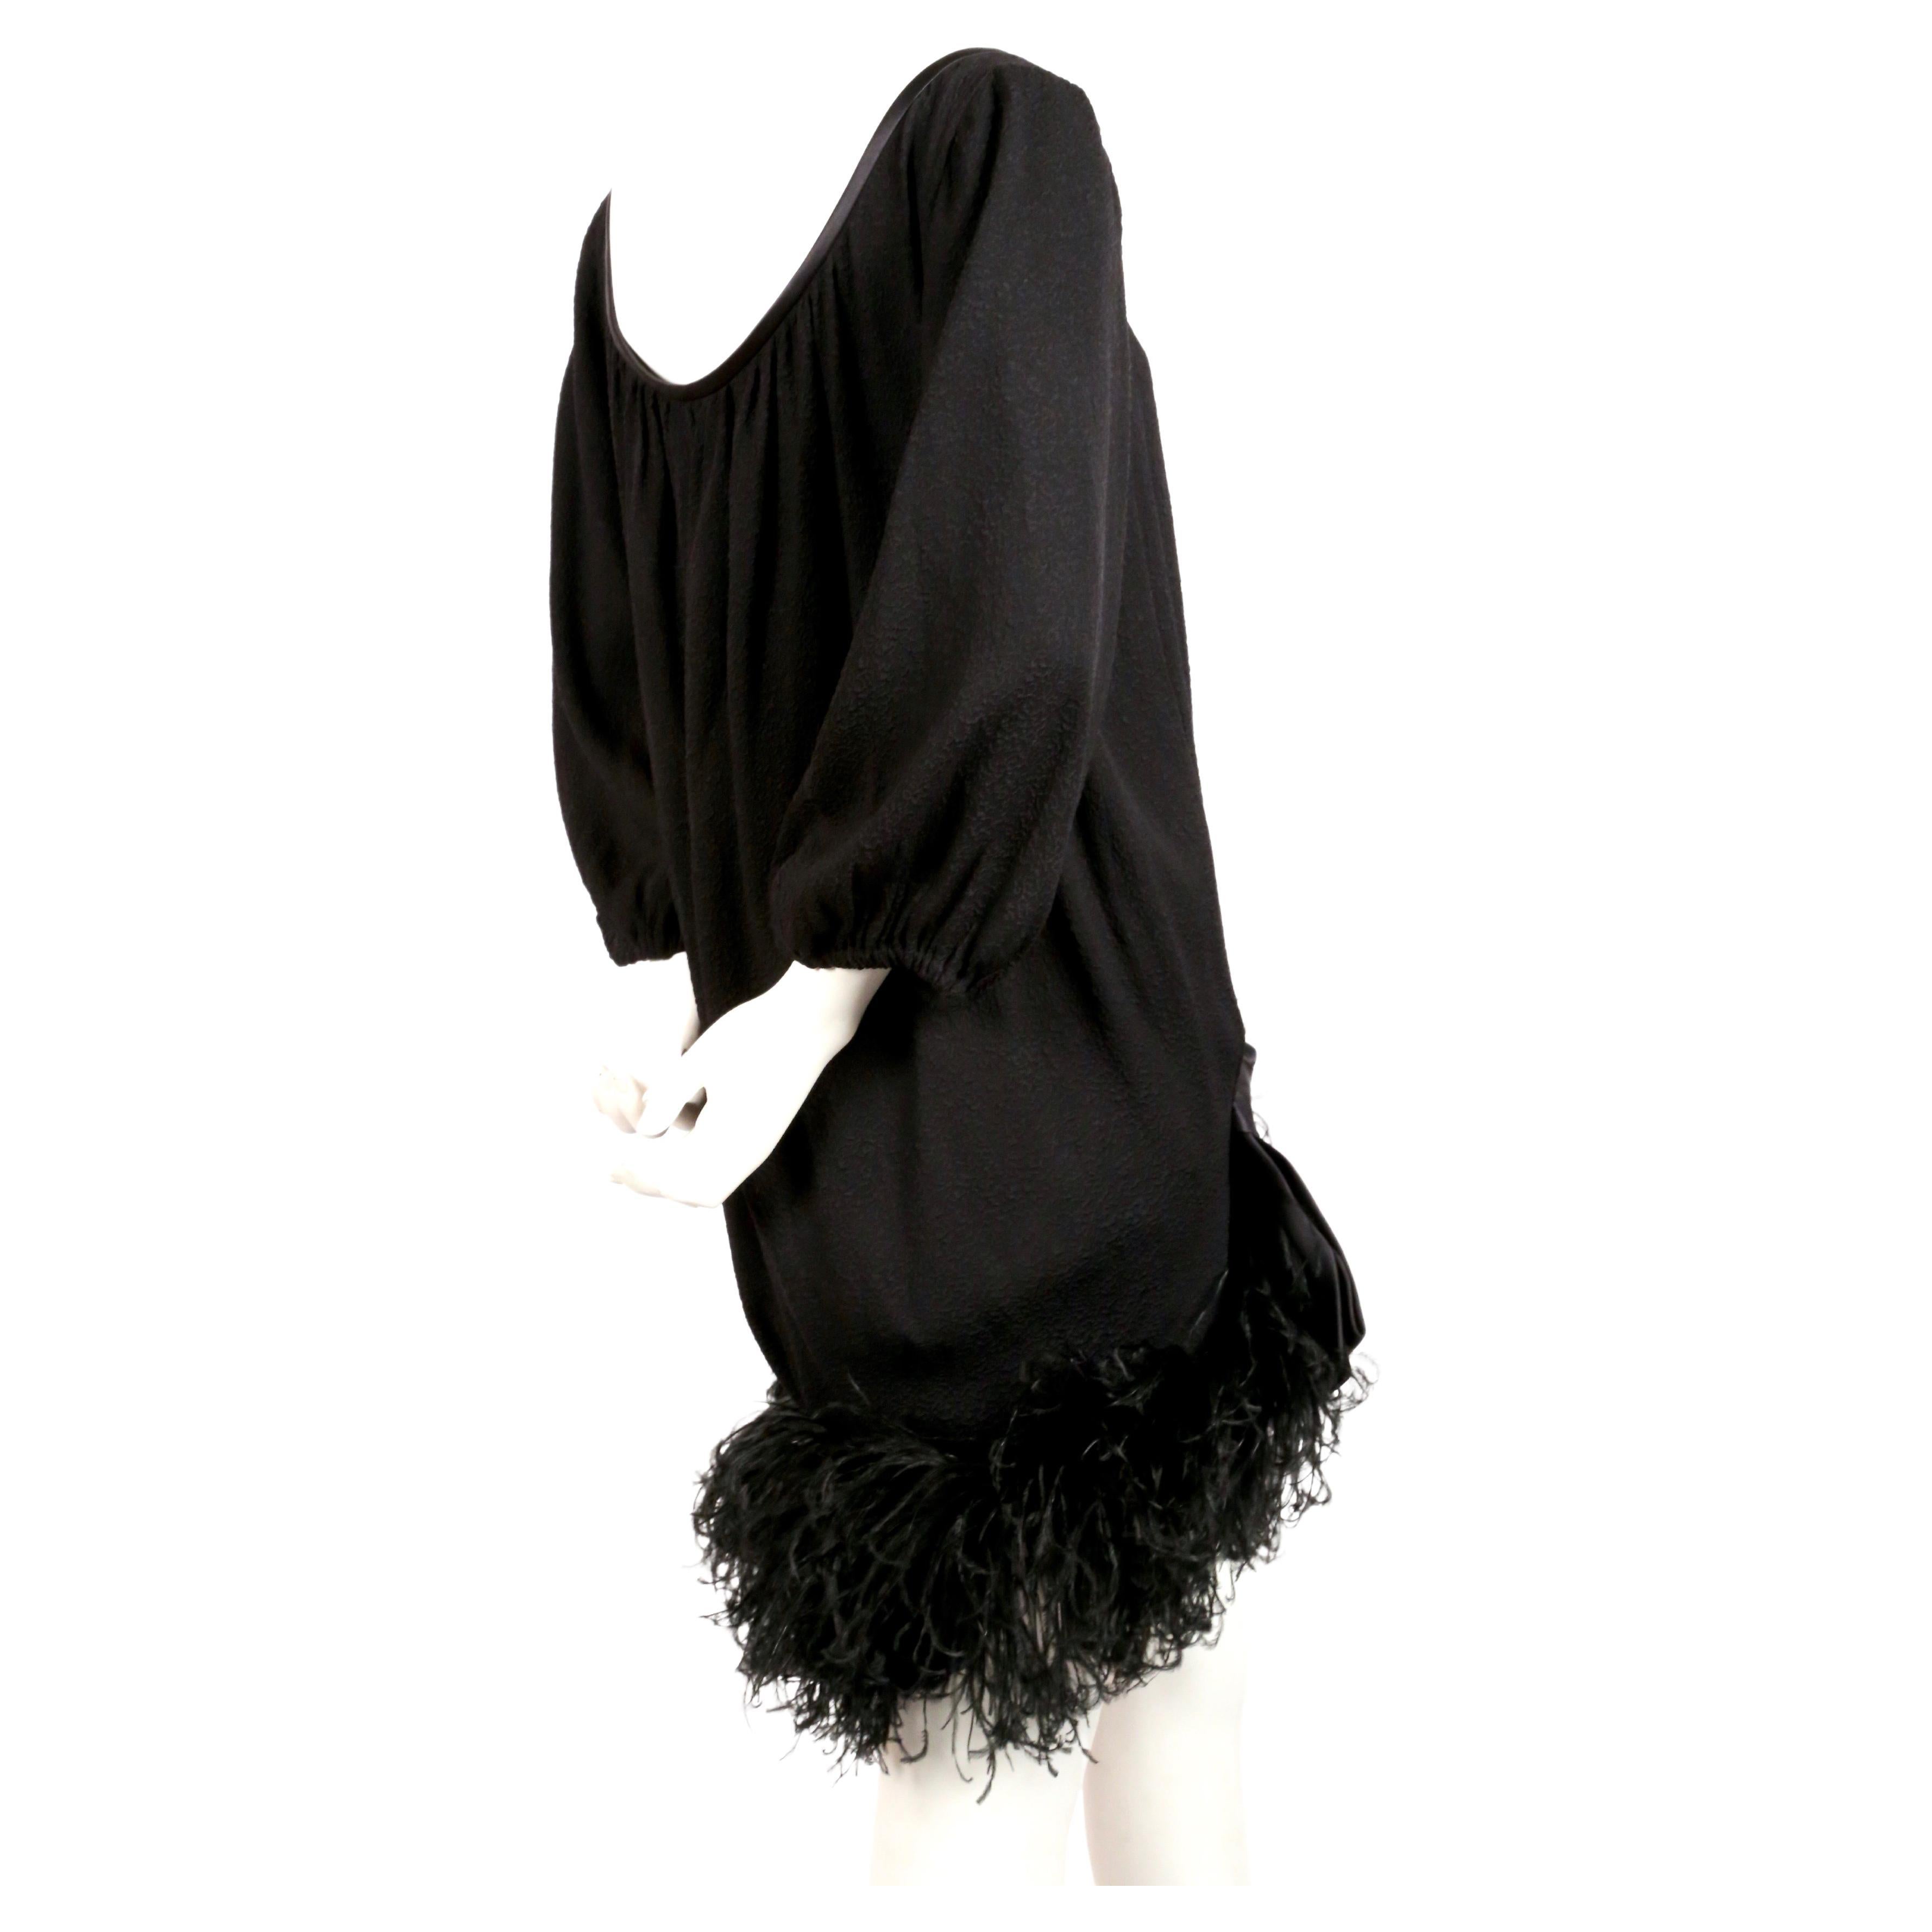 1970's YVES SAINT LAURENT Black Silk Dress with Marabou Feather Trim For Sale 1